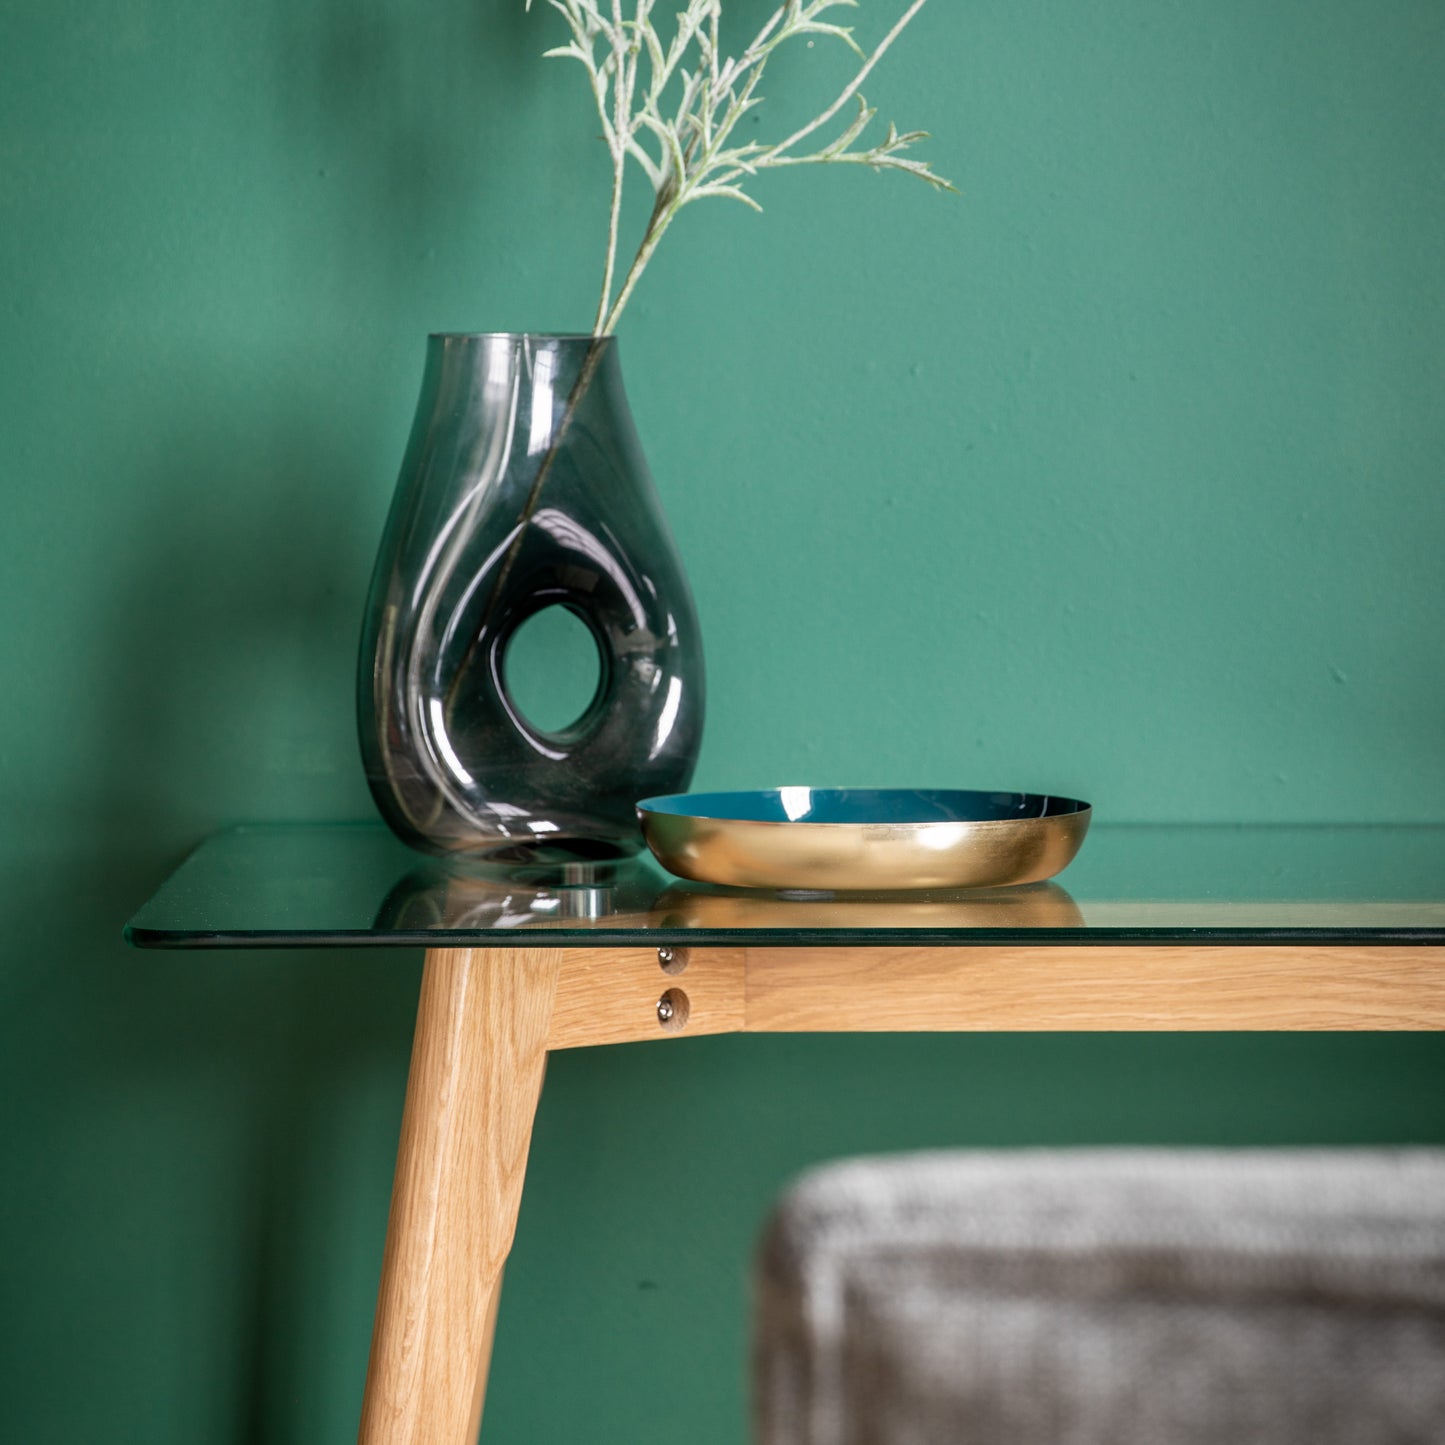 An Oak Desk with a vase on it next to a green wall from Kikiathome.co.uk, perfect for home furniture and interior decor.